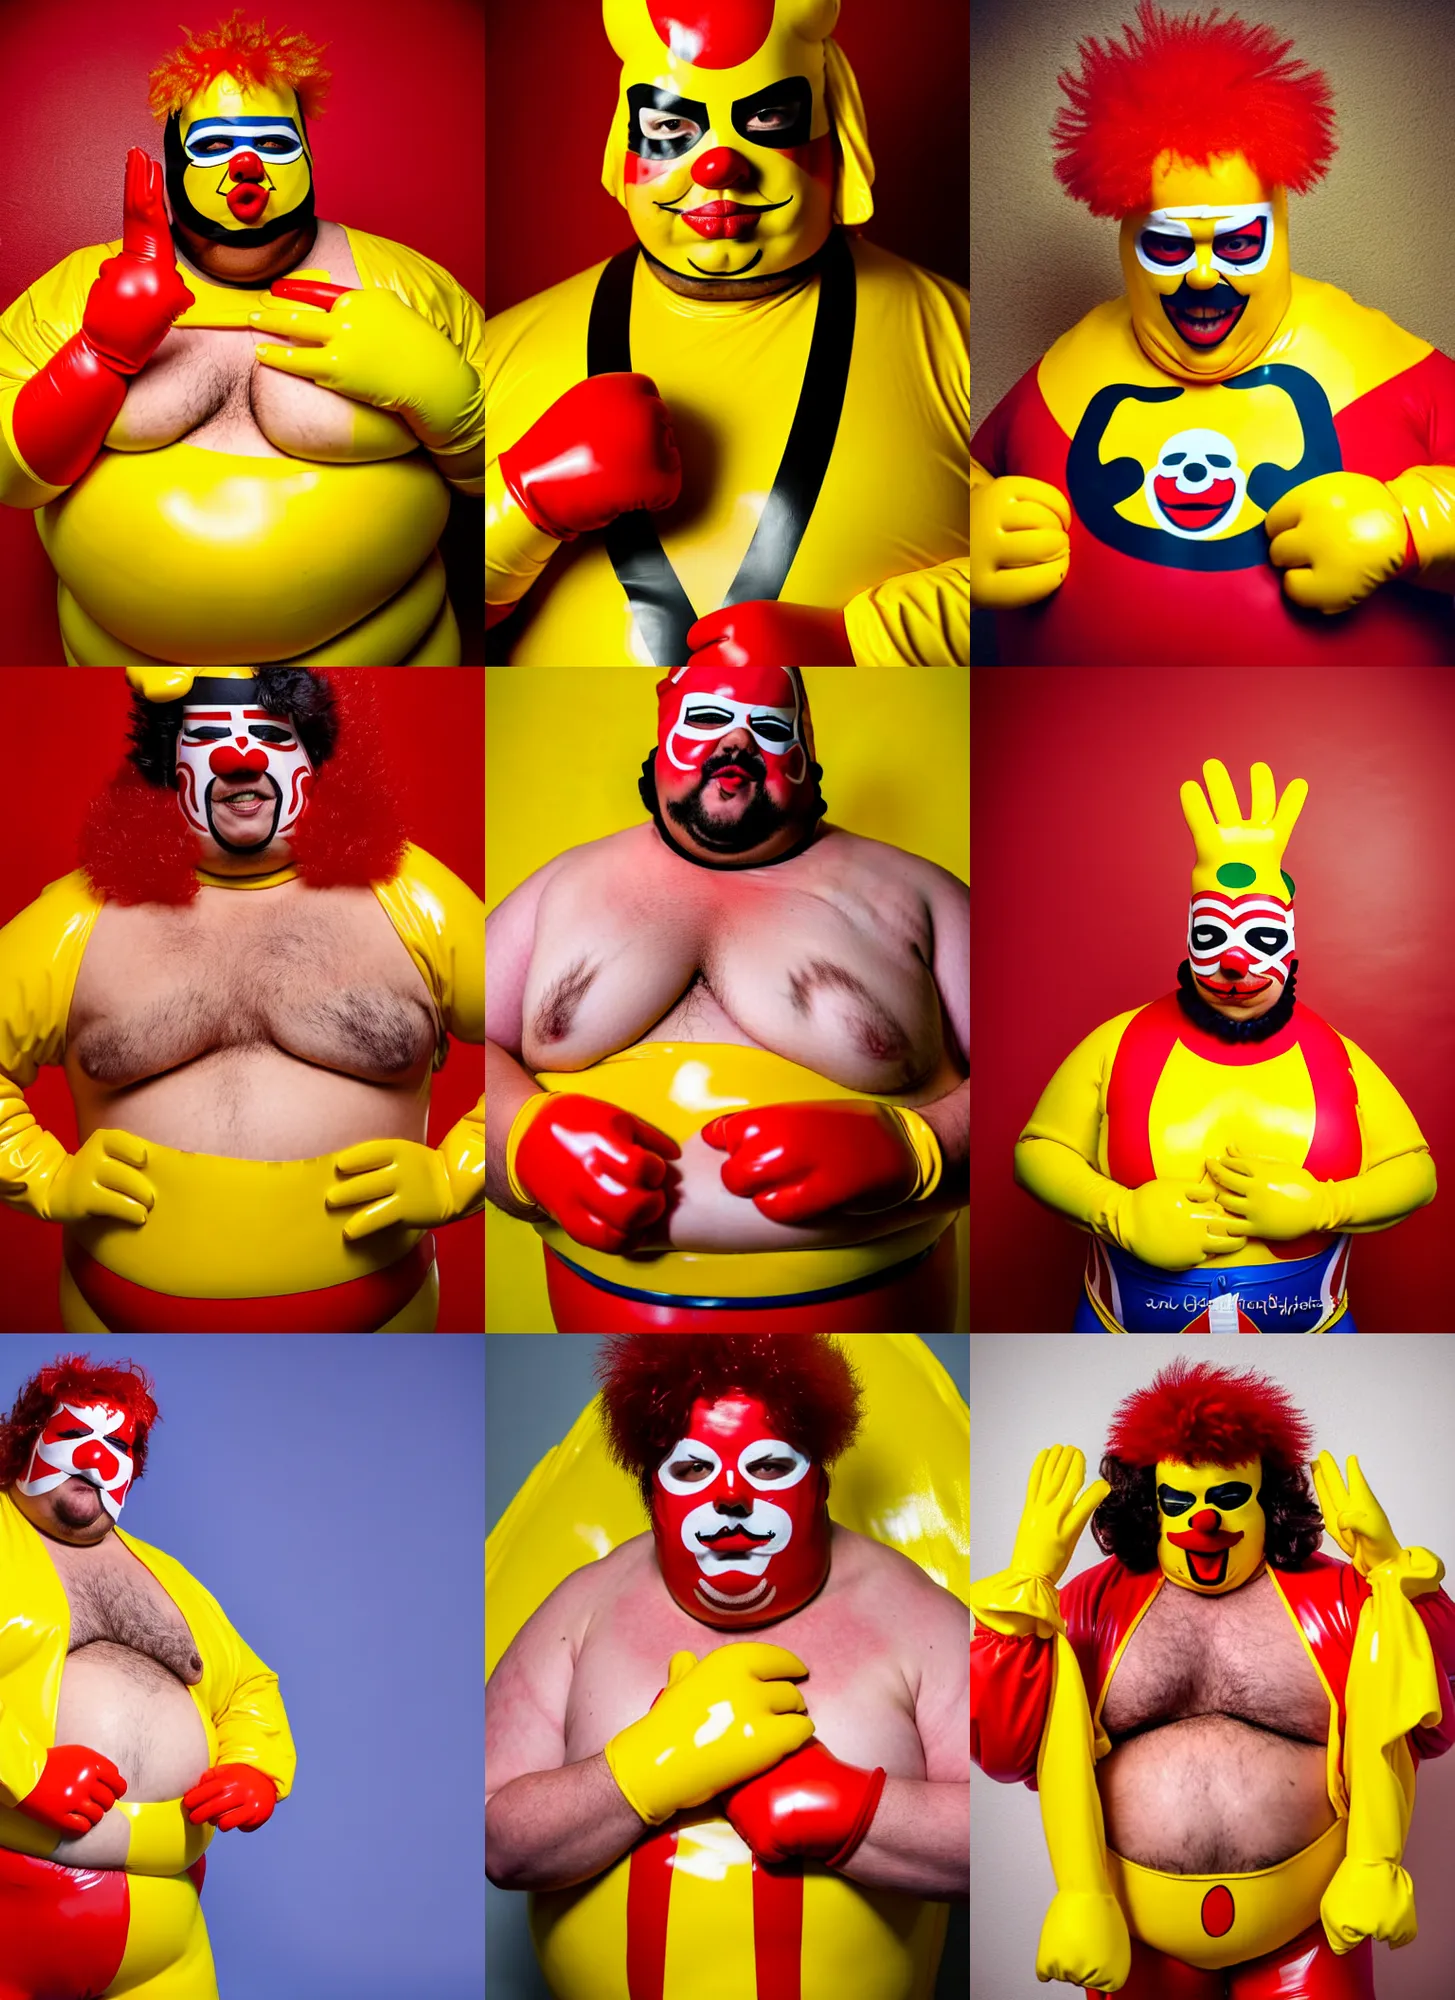 Prompt: wide angle lens portrait of a very chubby looking Lucha libre dressed in yellow and red Ronald McDonald rubber latex costume with red and white color latex sleeves and yellow latex gloves holding a huge sloppy hamburger, bare hairy chest, red Ronald McDonald hair, photography inspired by Oleg Vdovenko